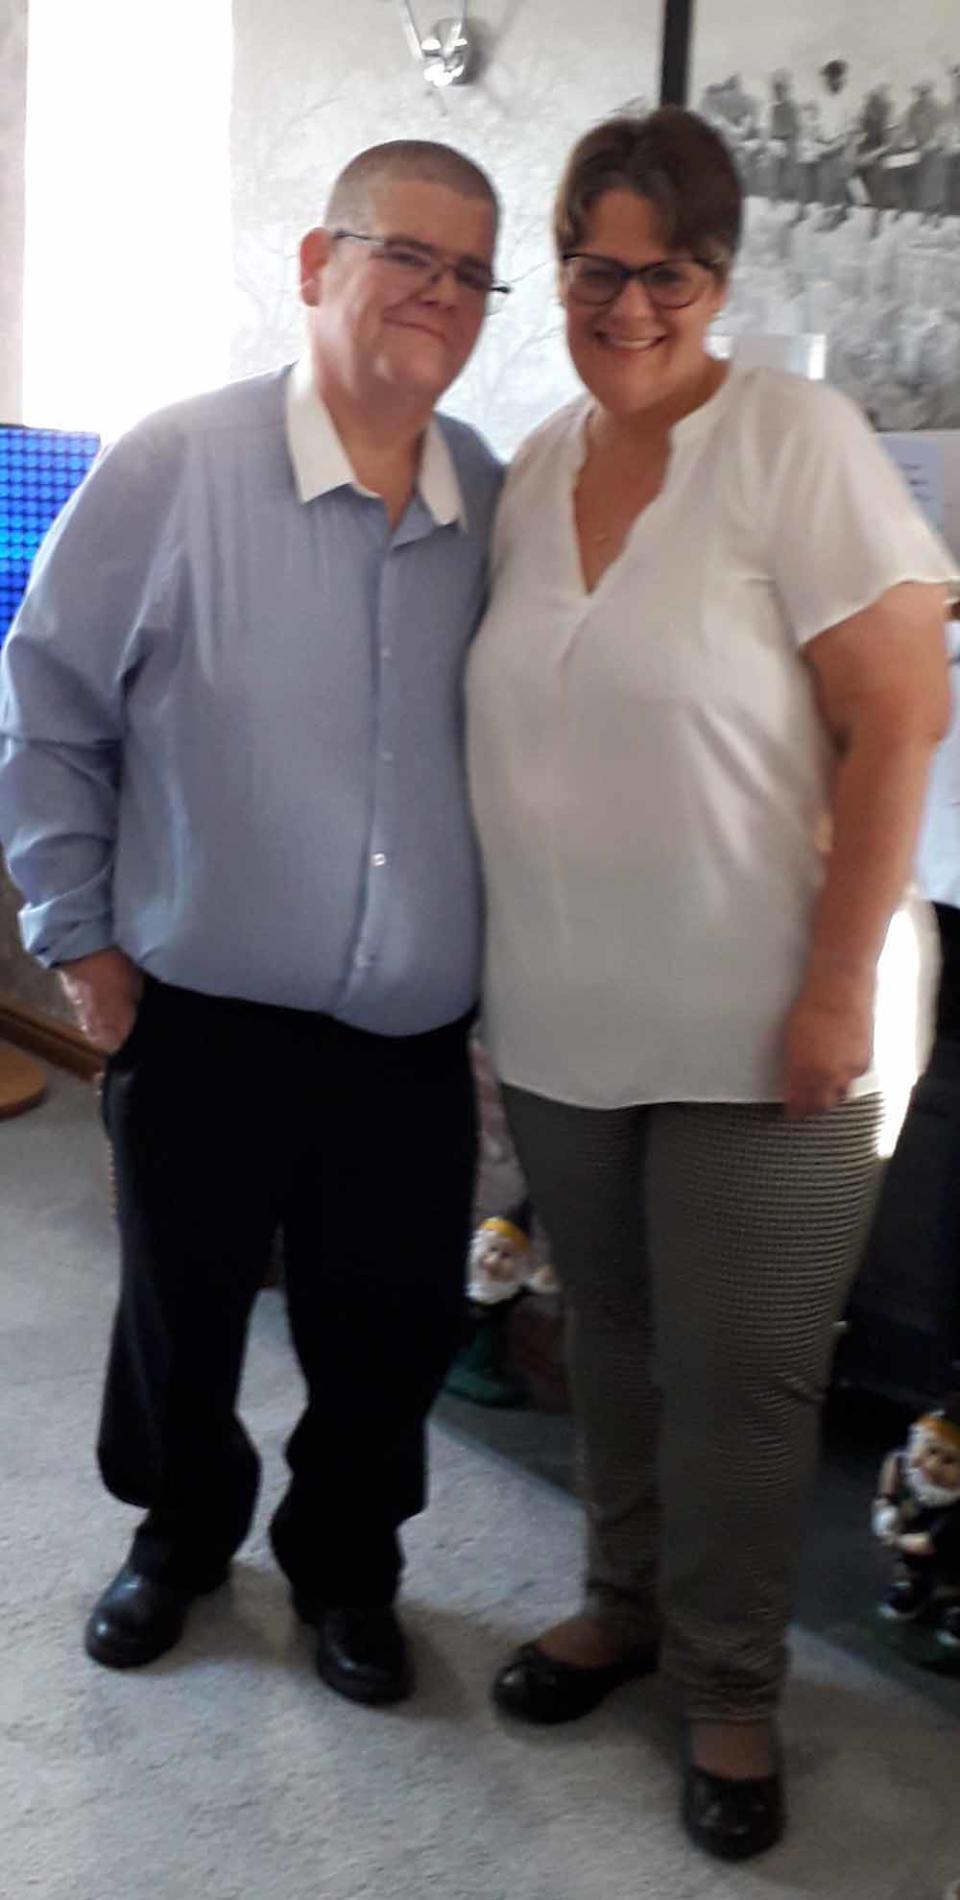 Ian, pictured with Clare, is now four stone lighter weighing 14st 2lbs (Collect/PA Real Life).